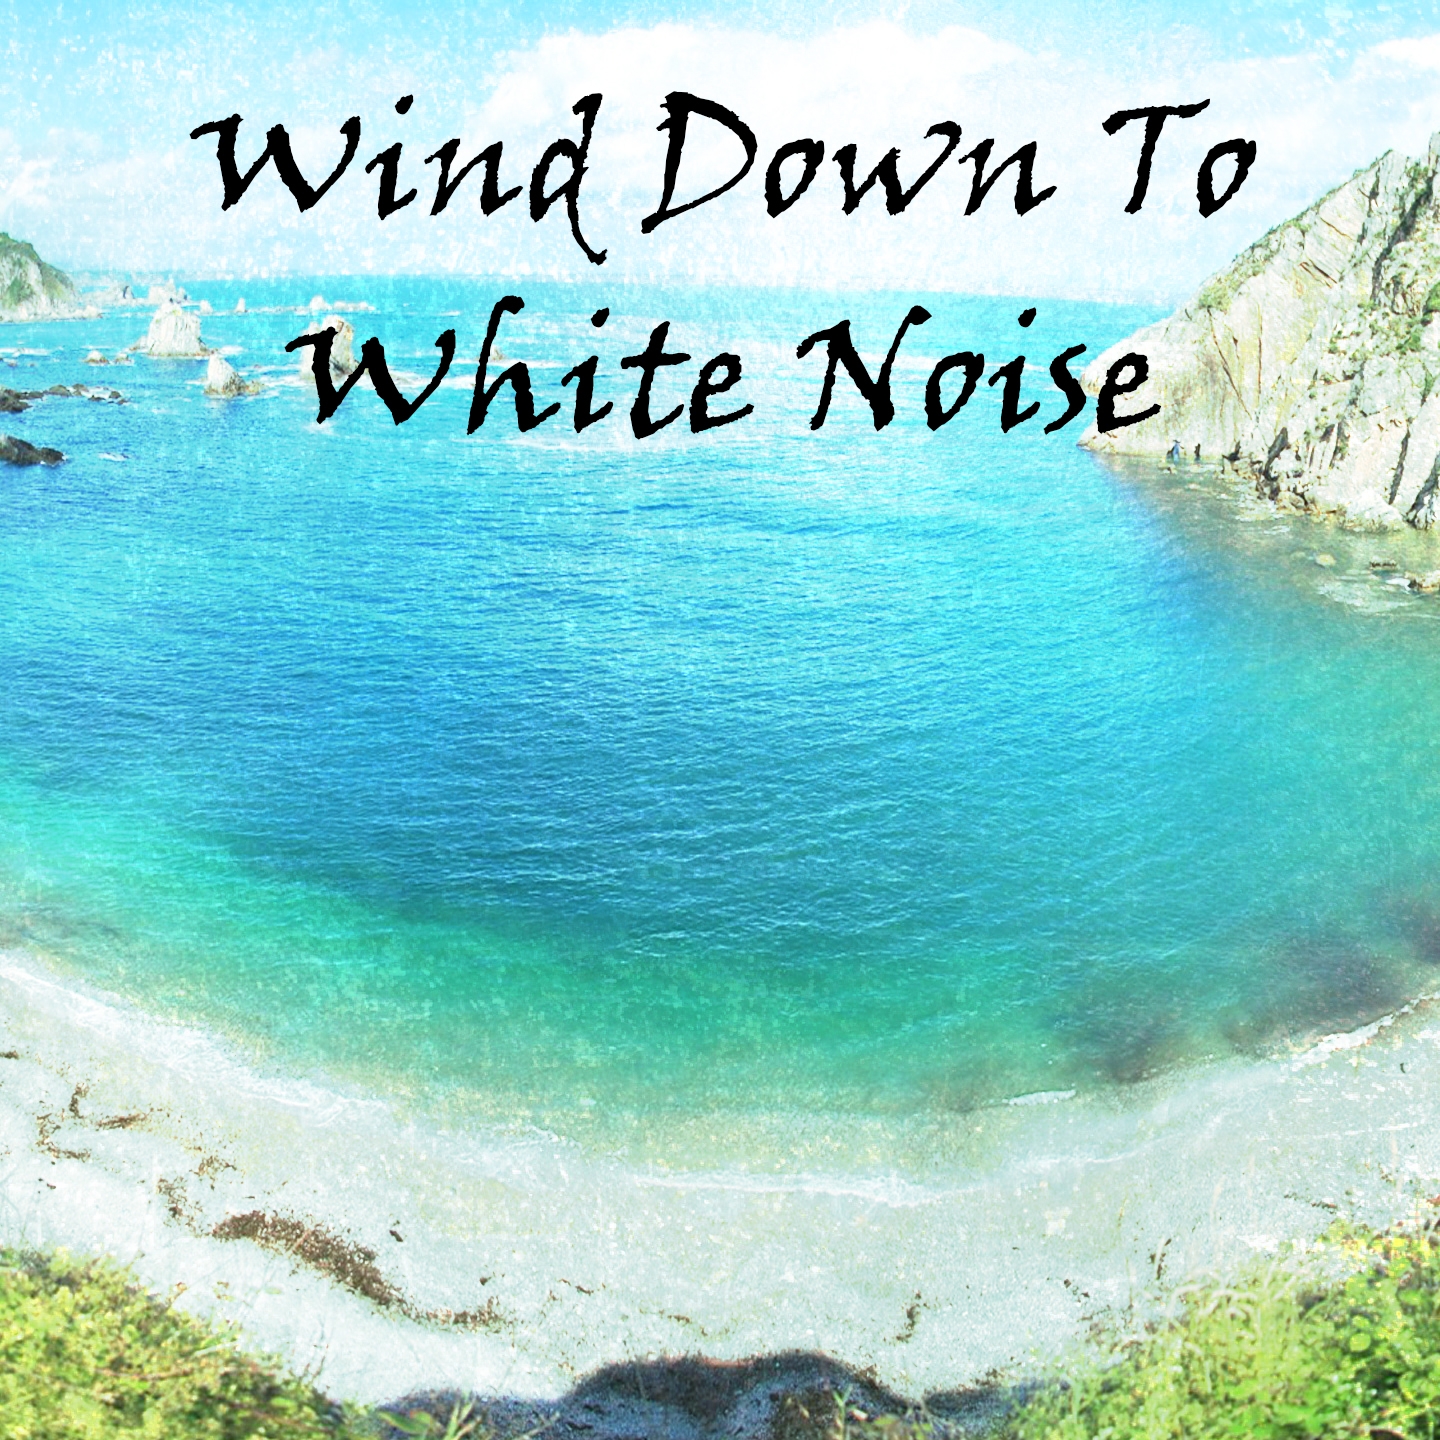 Wind Down To White Noise